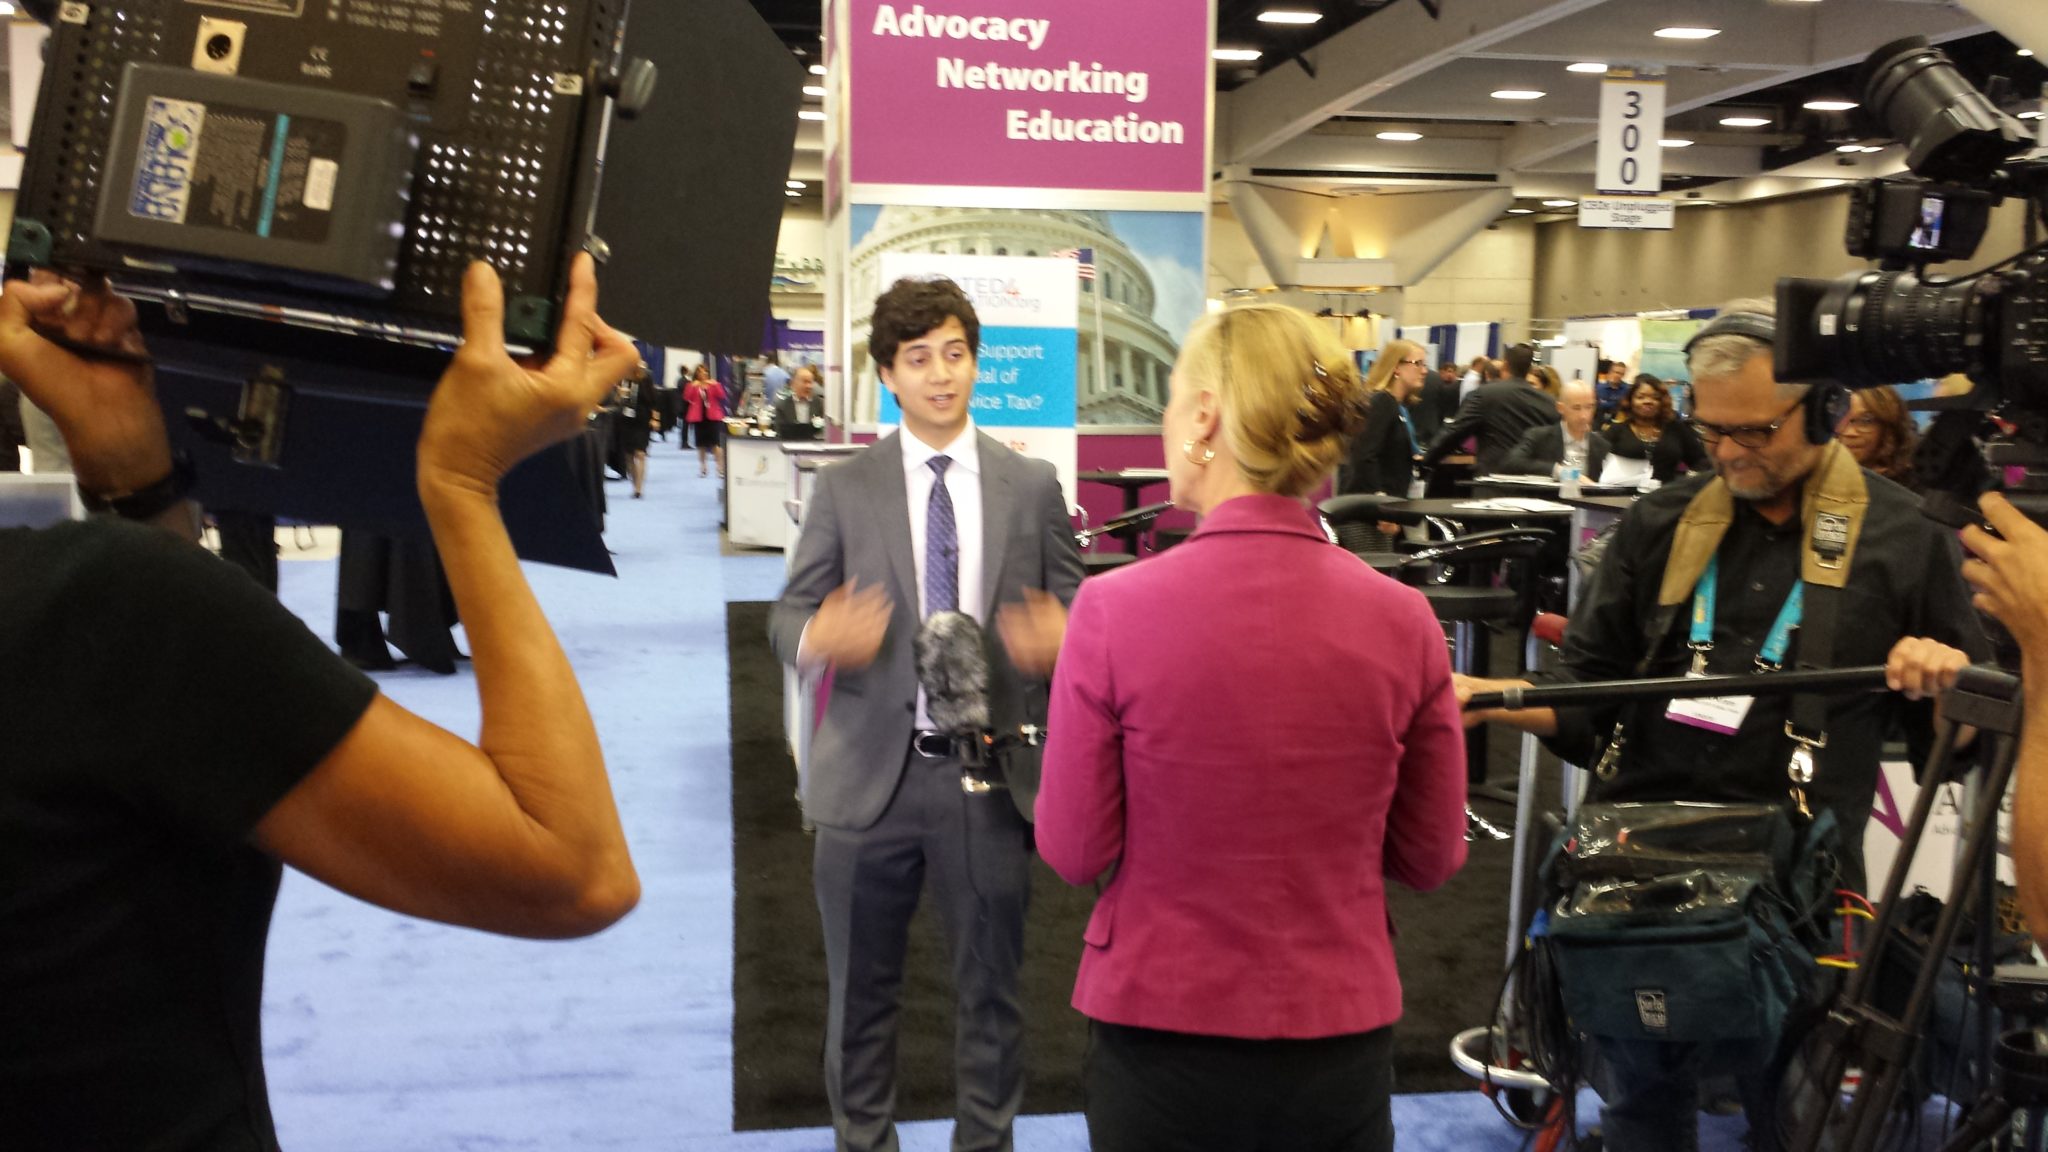 Scholar Daniel Campo (me) being interviewed on my experiences at AdvaMed 2015